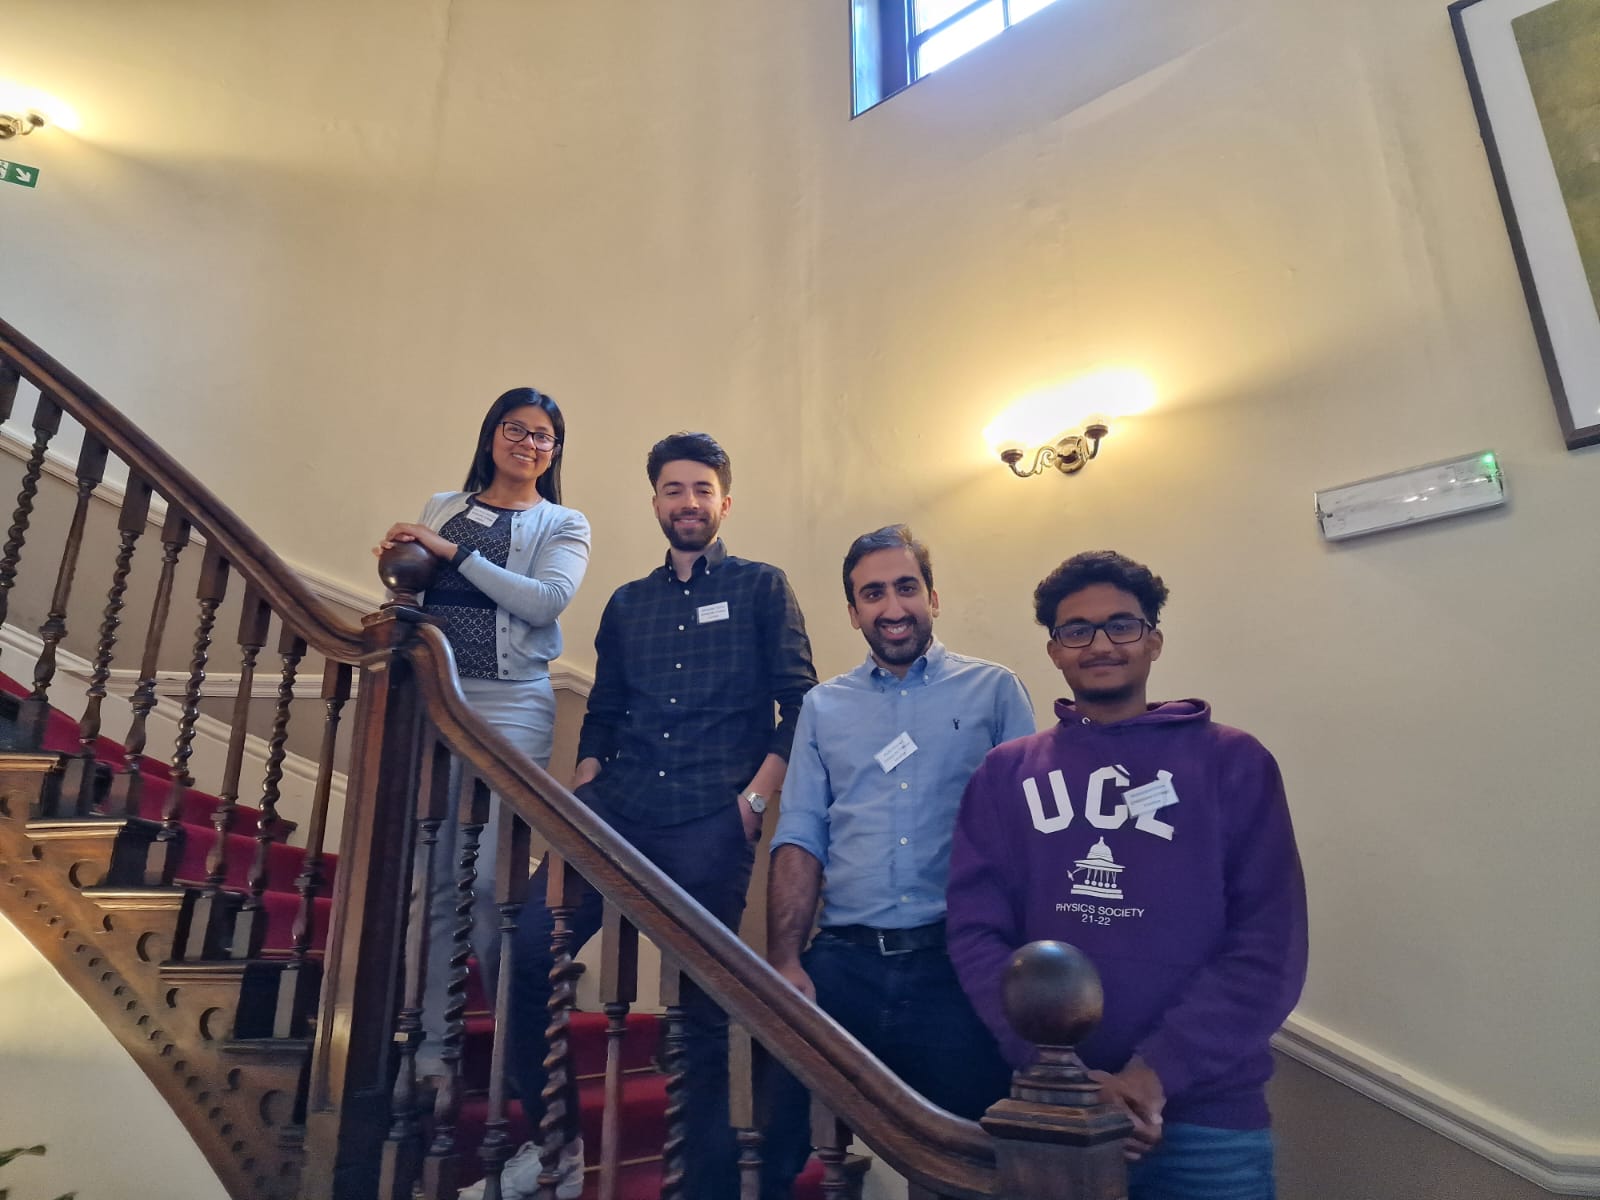 FABILIS group with Dr Perez Martinez, Alexander Storey, Aydin Sabouri and Shaun Boodram in a staircase in Cosener's house